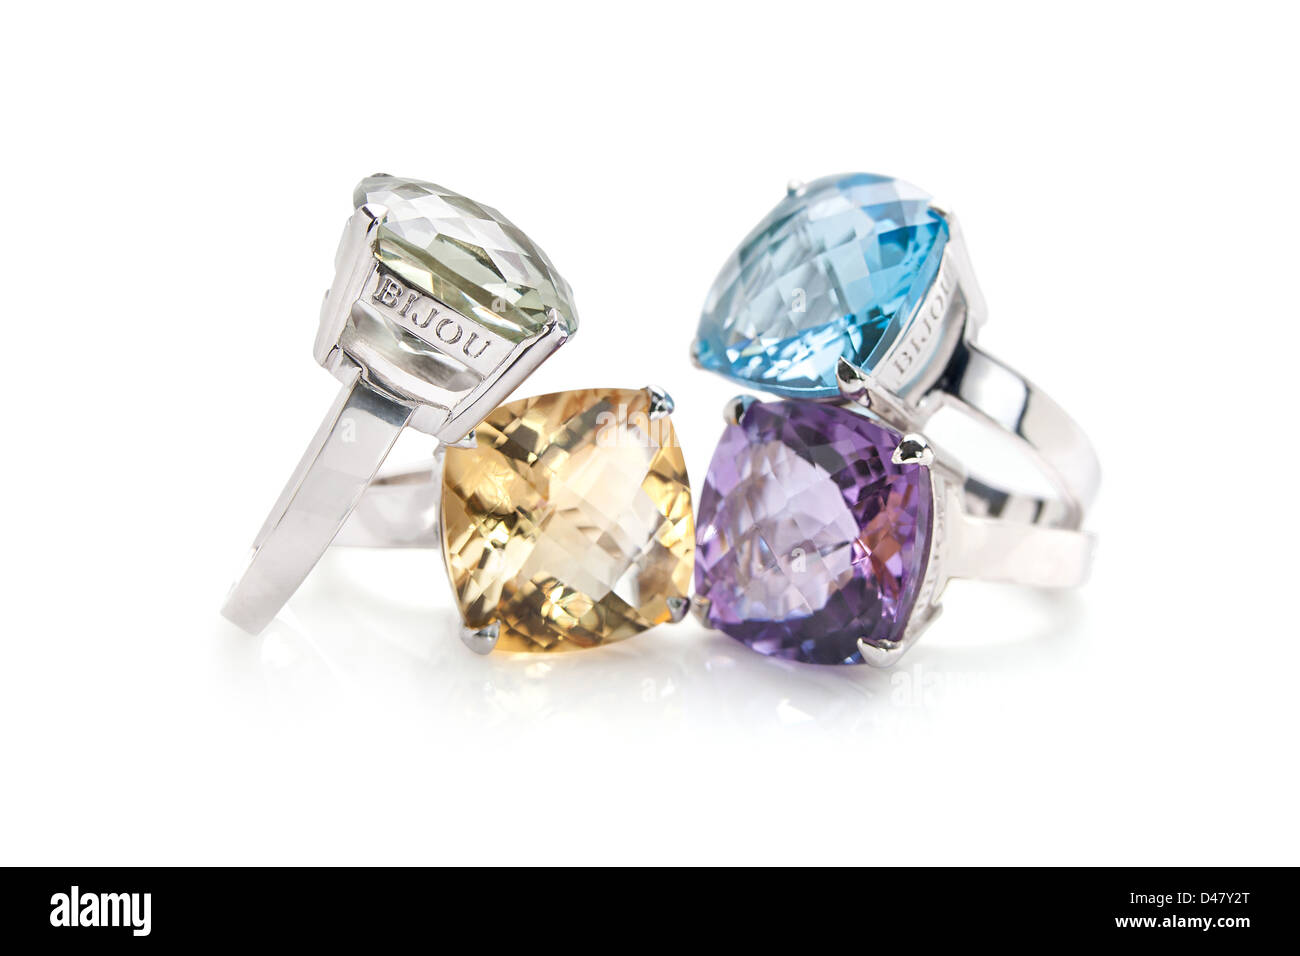 White gold rings with large amethyst, topaz, tourmaline and peridot  precious stones inset, yellow, blue purple, yellow, green. Stock Photo